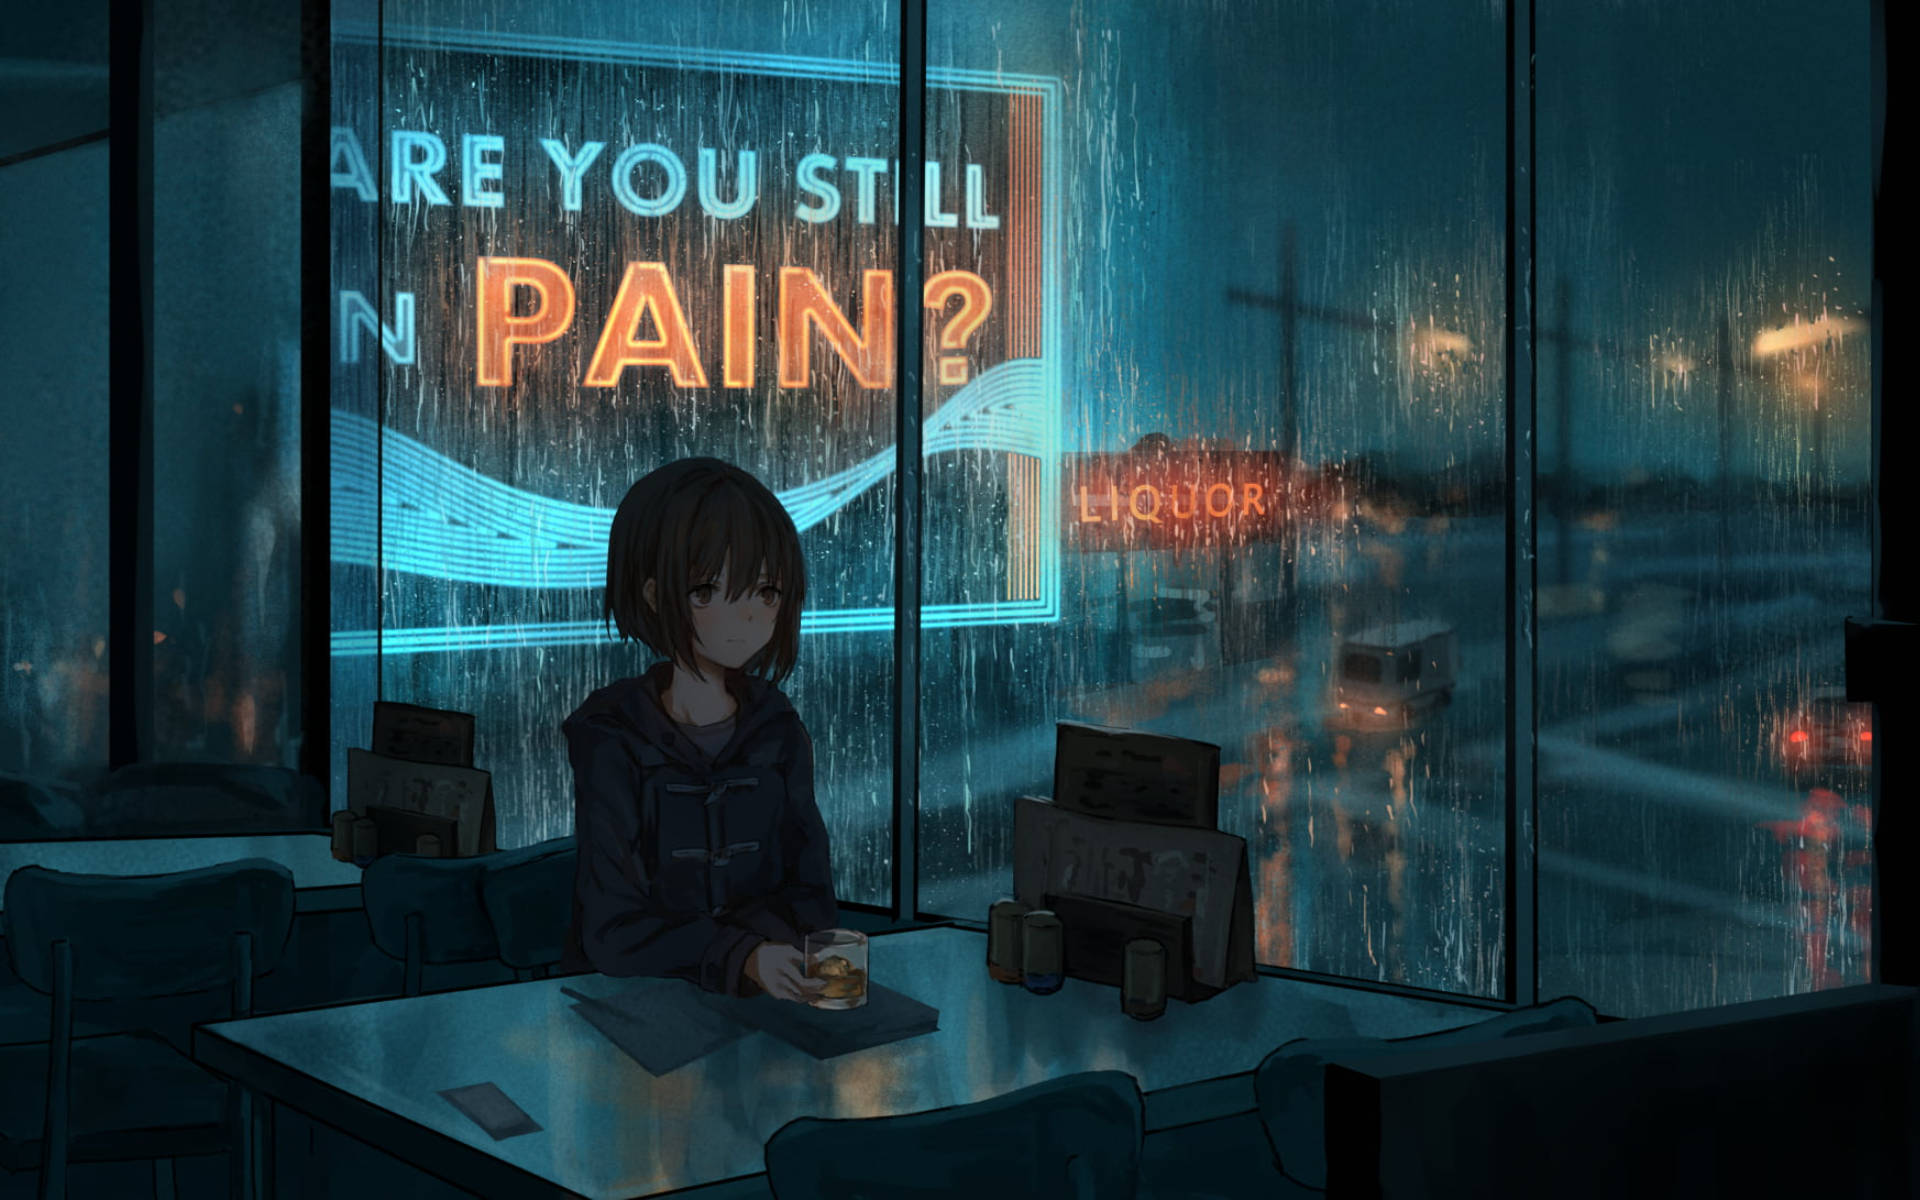 Download Anime Girl Alone In A Cafe Wallpaper 